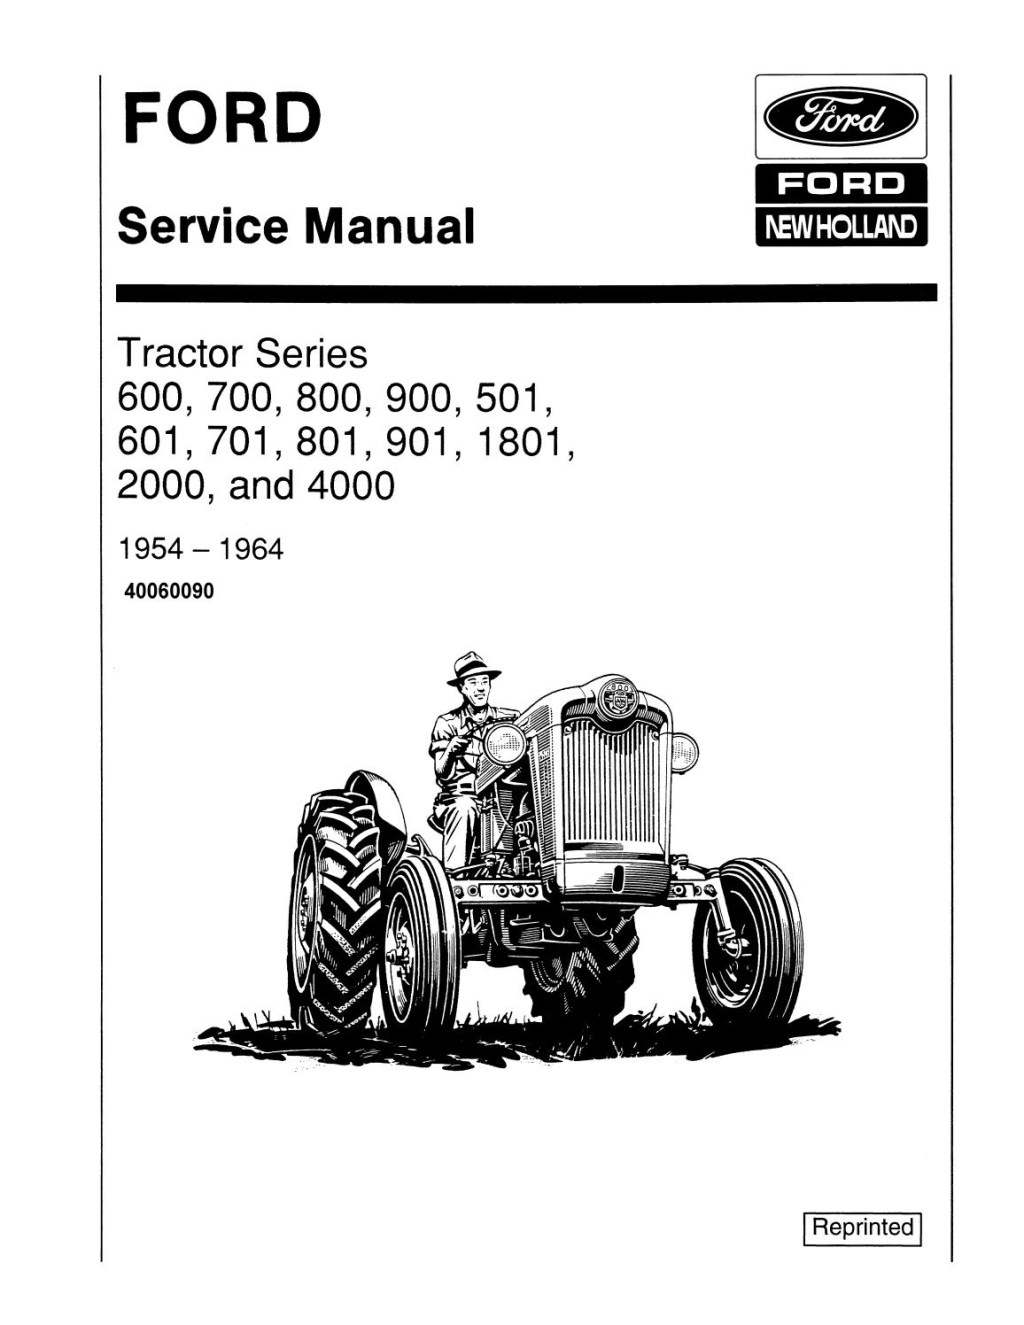 Picture of: Ford  Tractor (-) Service Repair Manual by fjfkkamdi